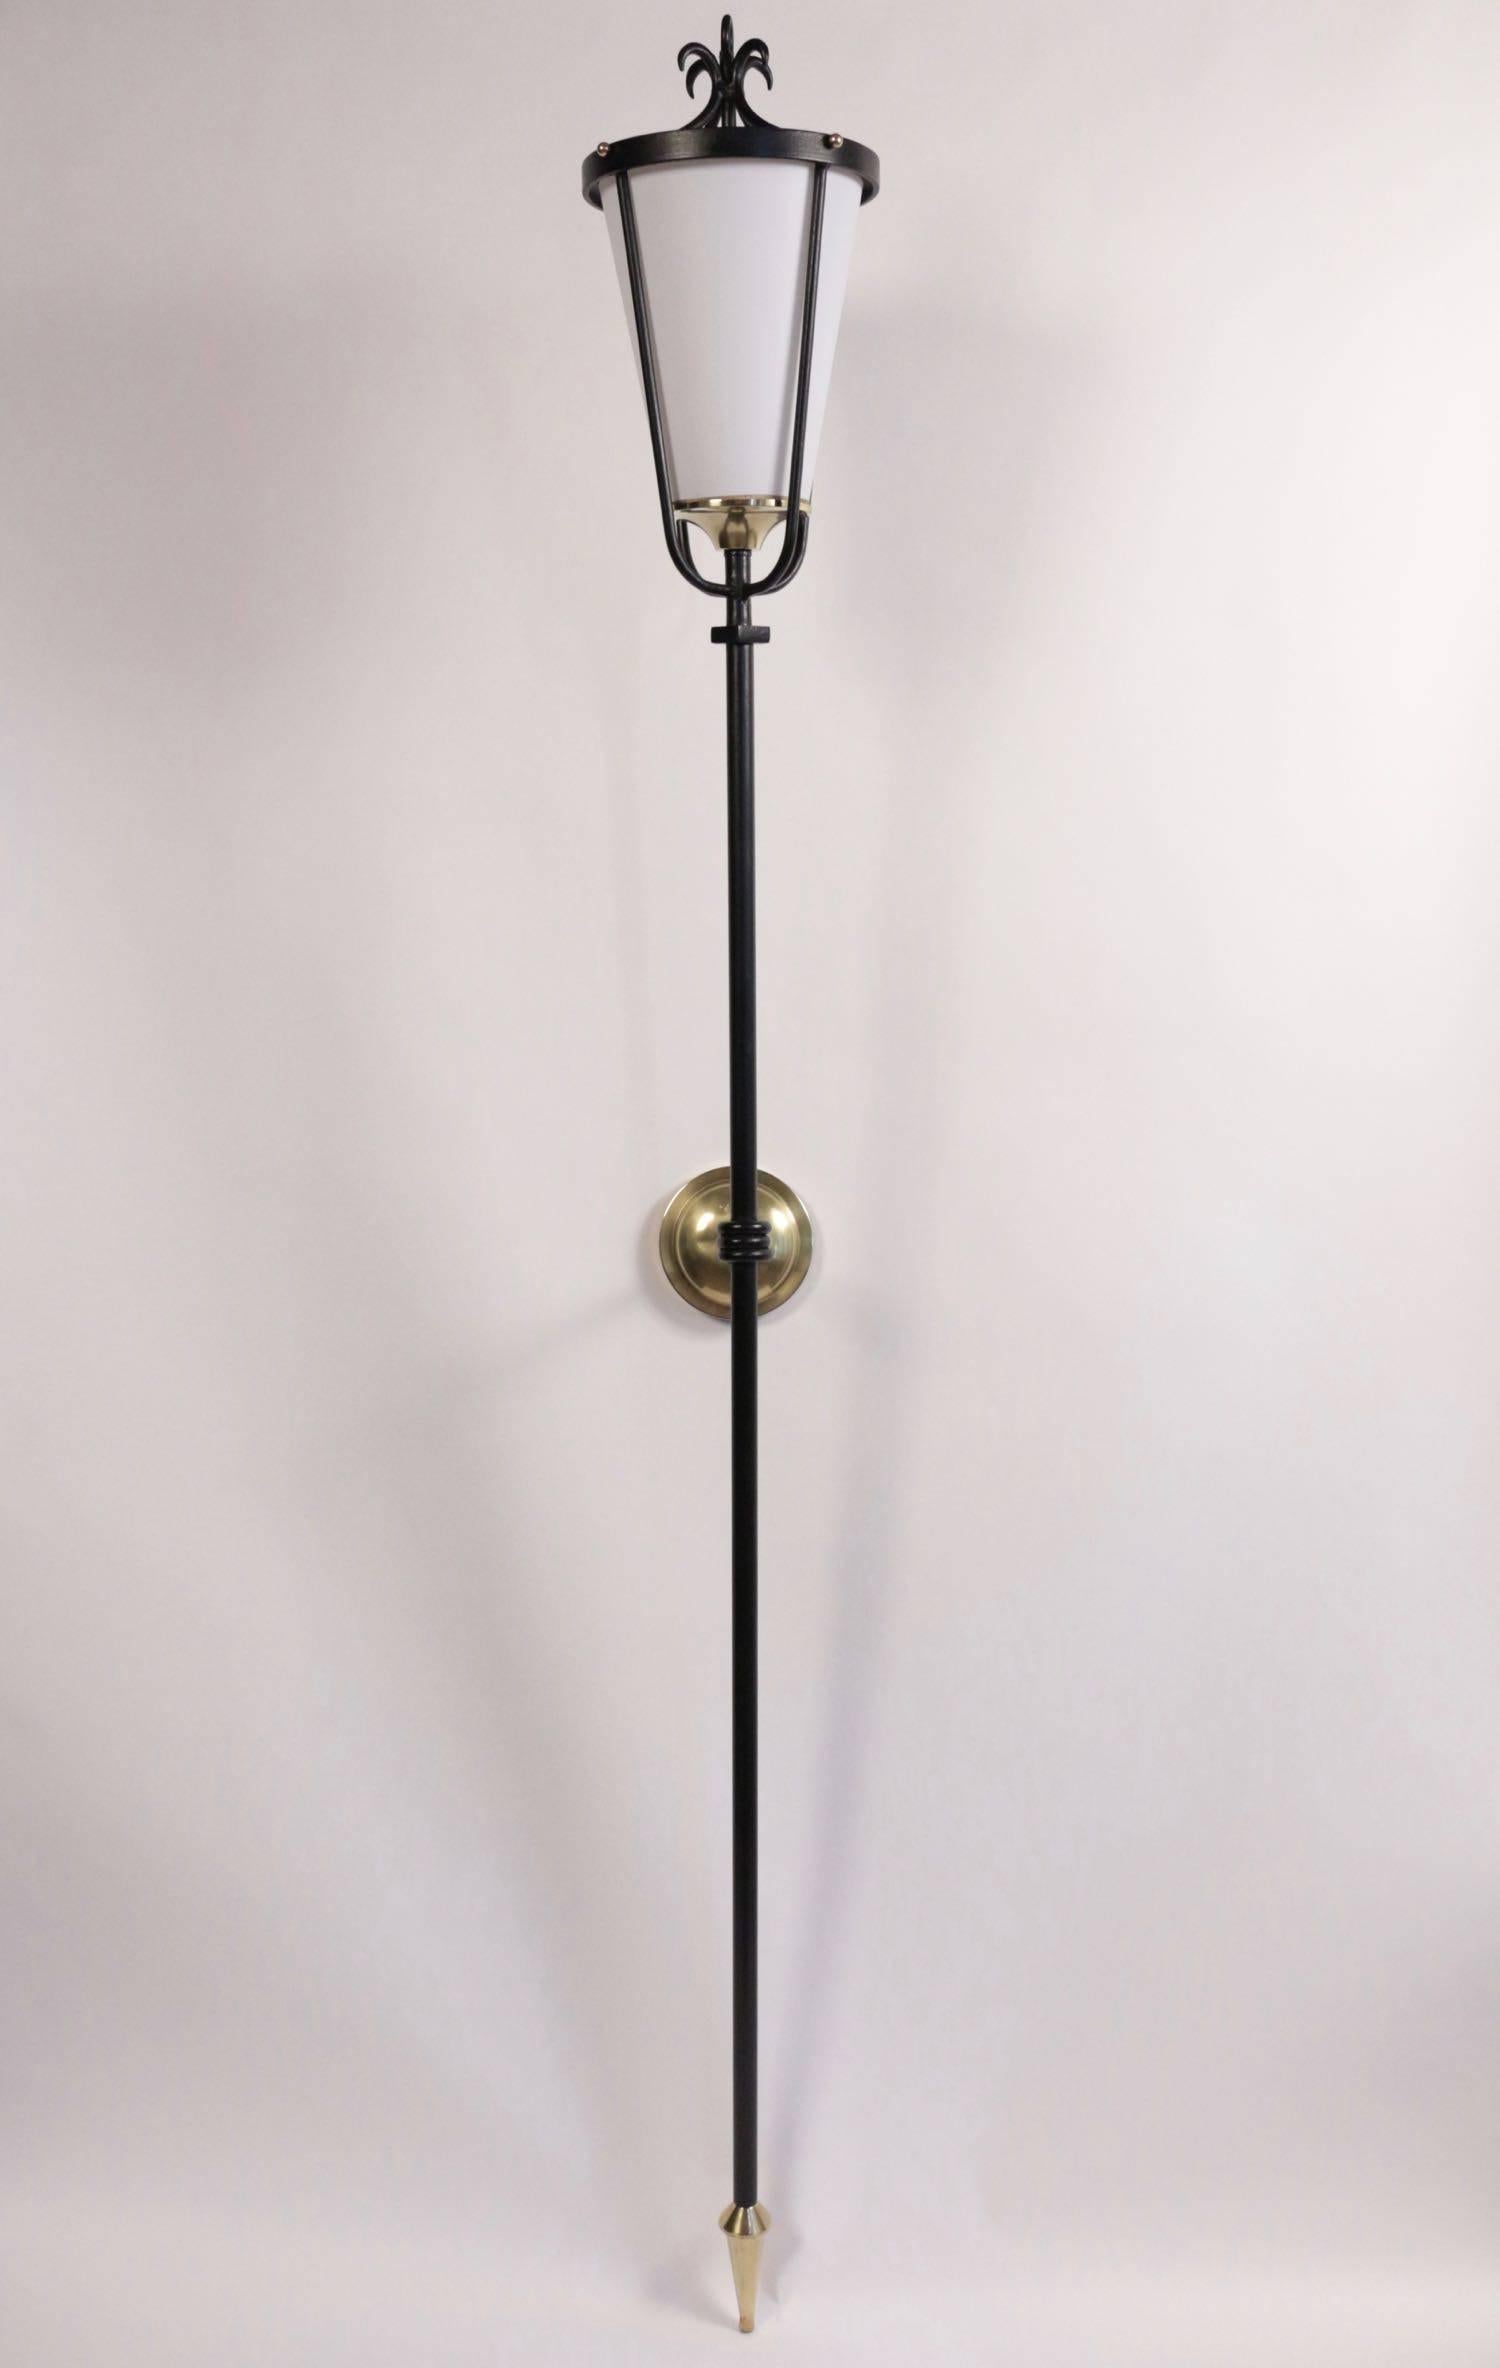 Pair of flare sconces in black lacquered metal.
Black lacquer metal trunk on which stands a lantern with a lampshade. The trunk ends with a decorative pike. A support allows wall mounting. A brass cache hides the support.
1950s-1955s French work